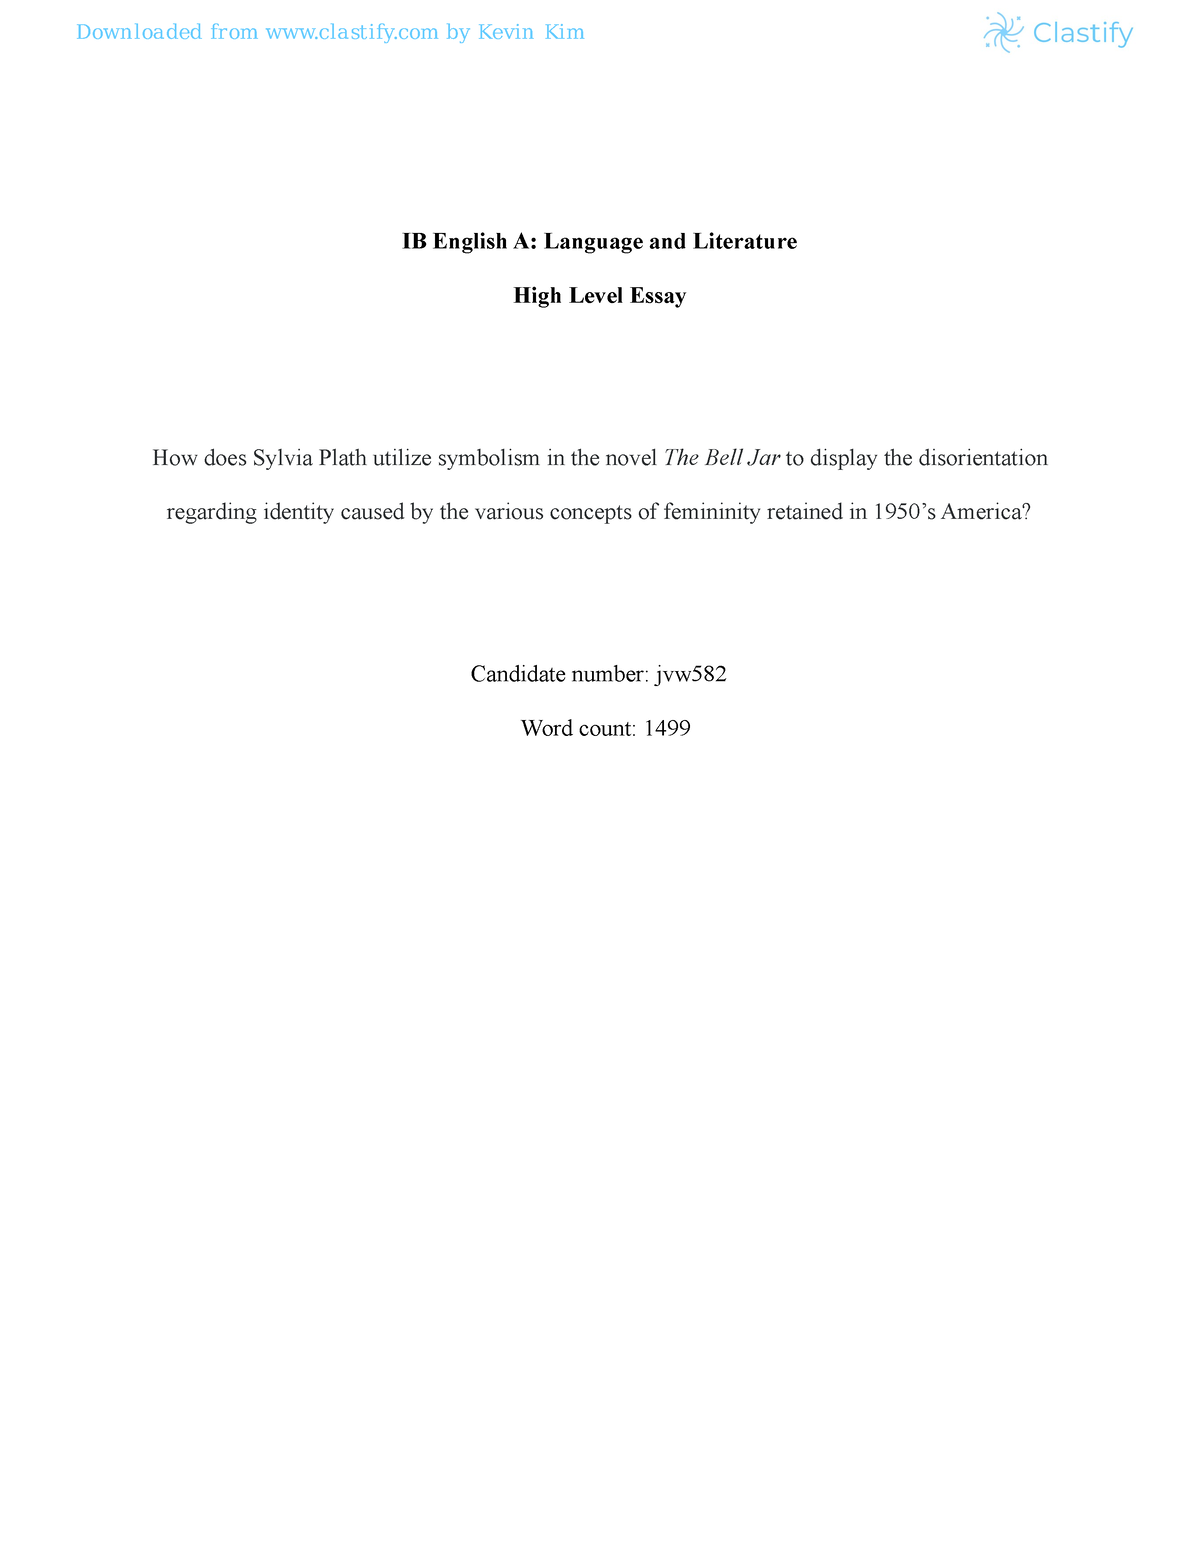 language and literature extended essay